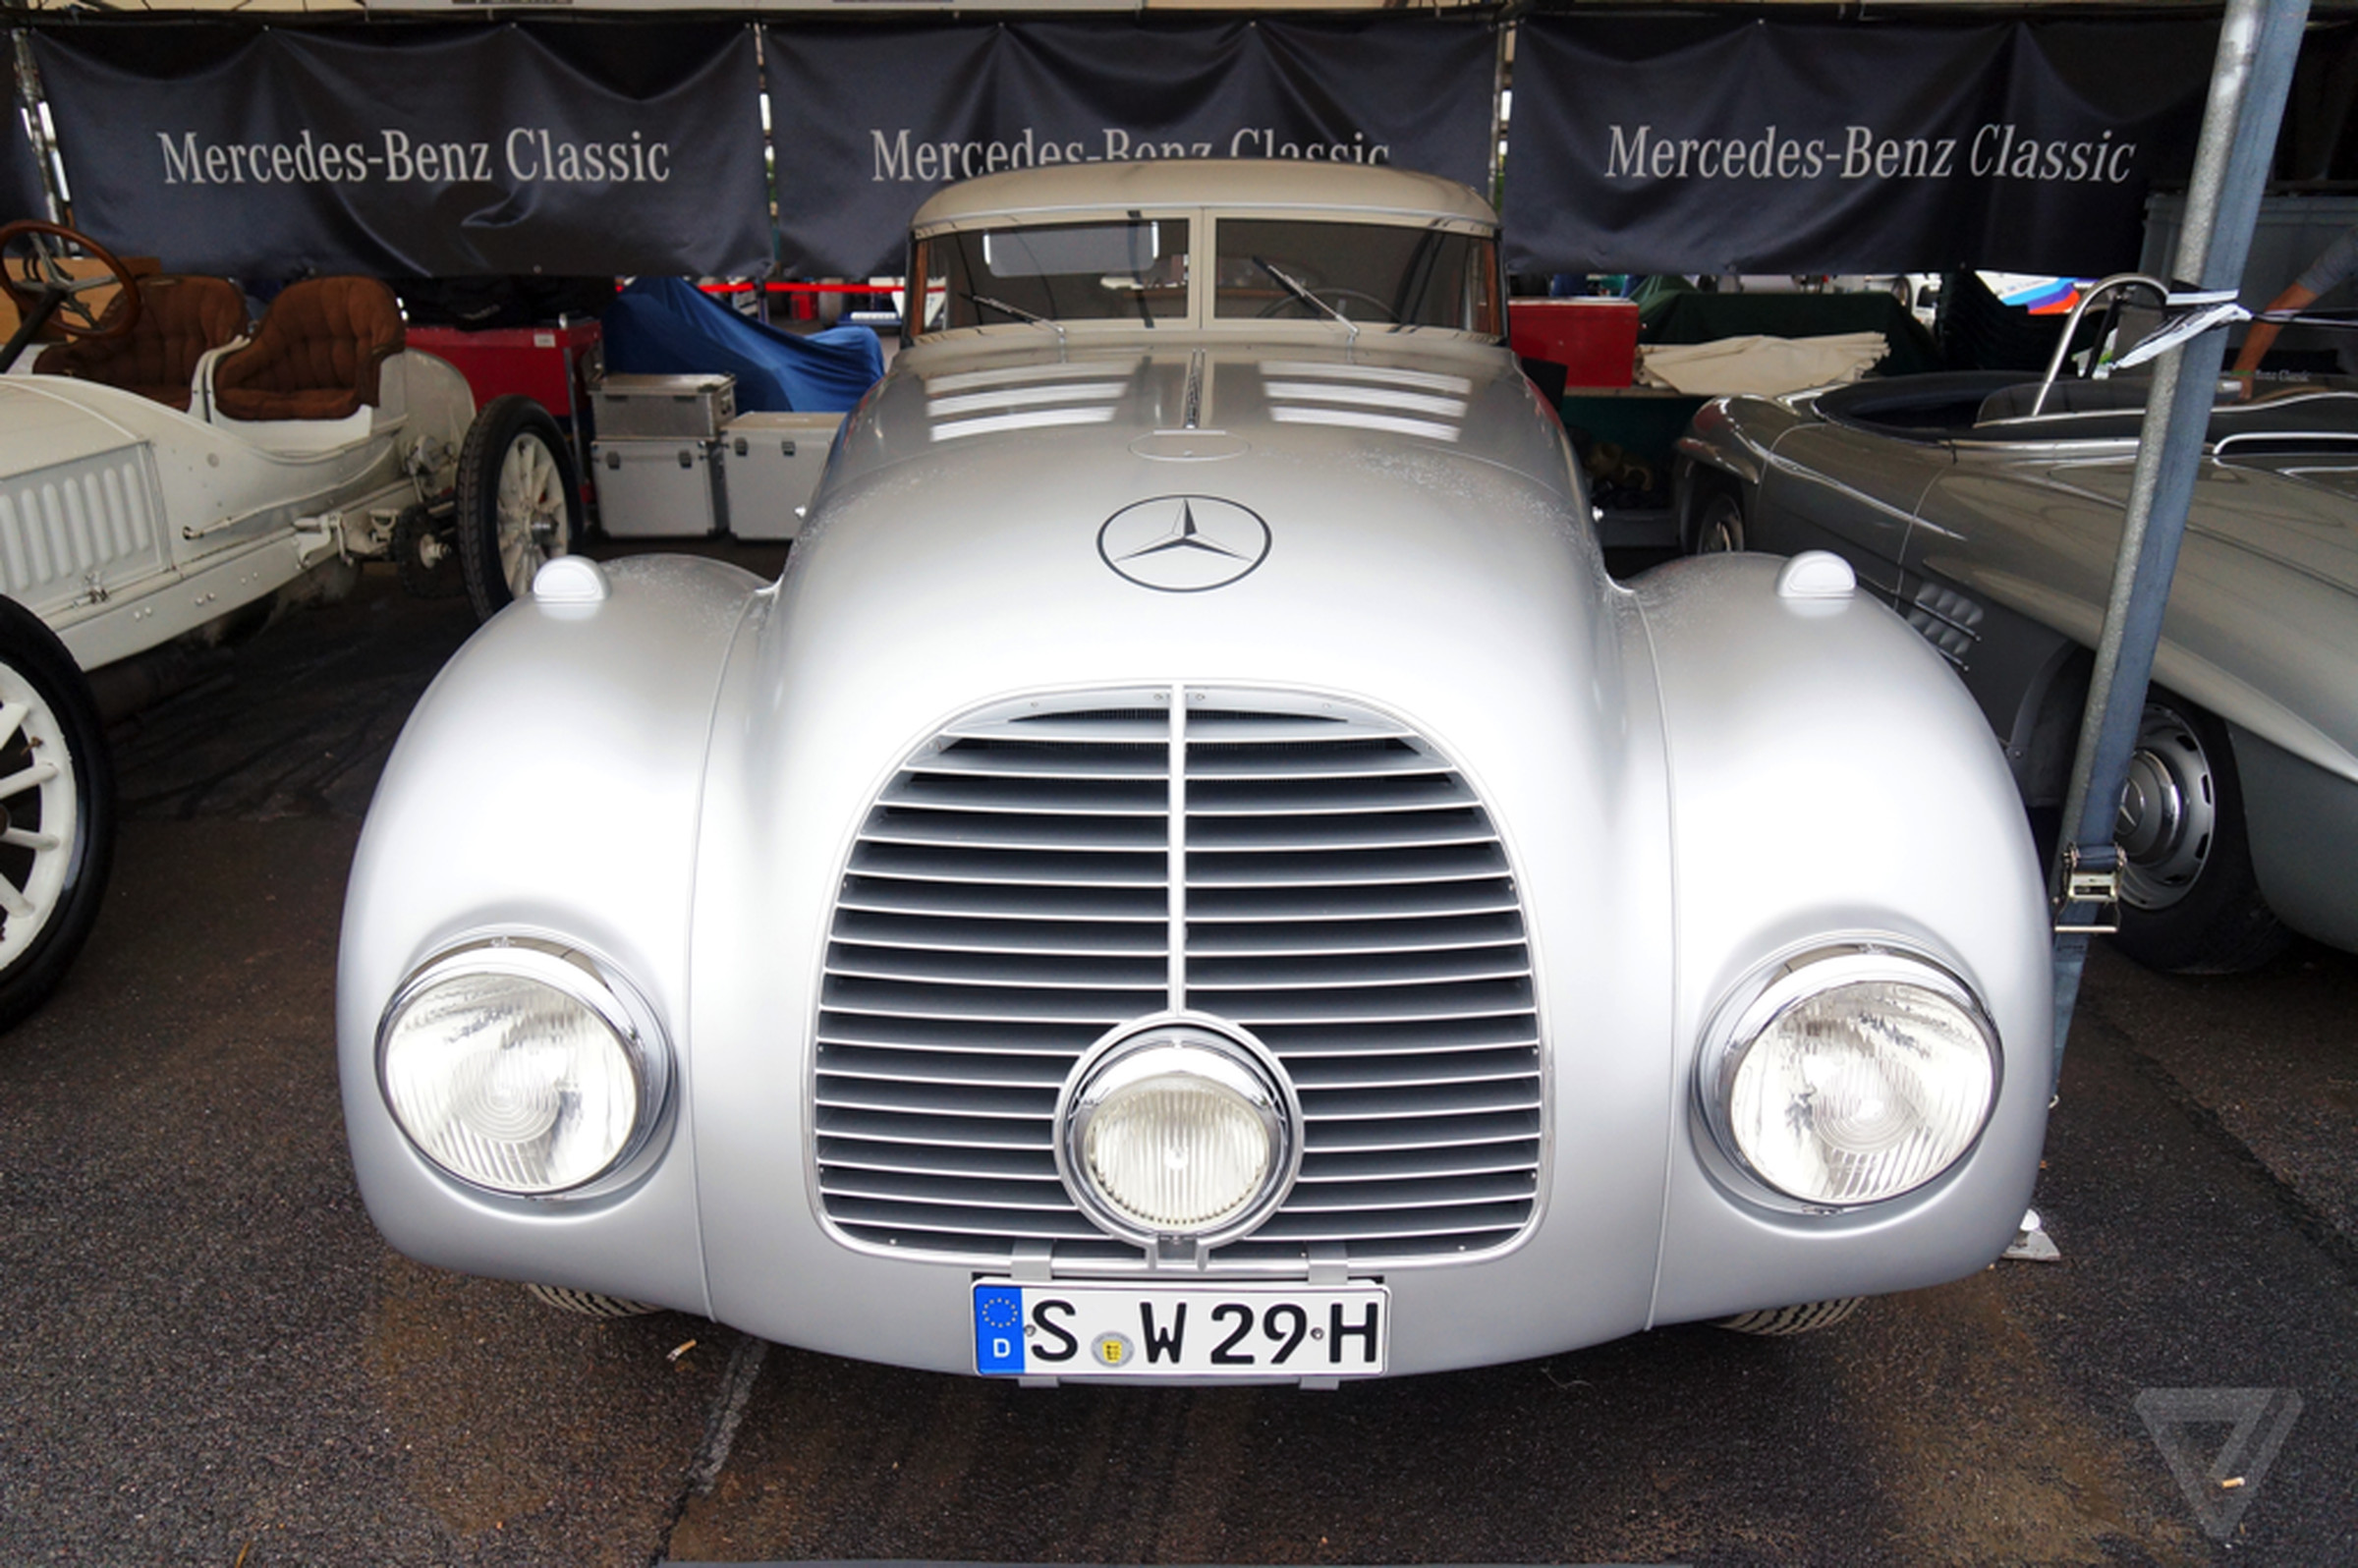 Goodwood Festival of Speed 2016 classic cars, part 2